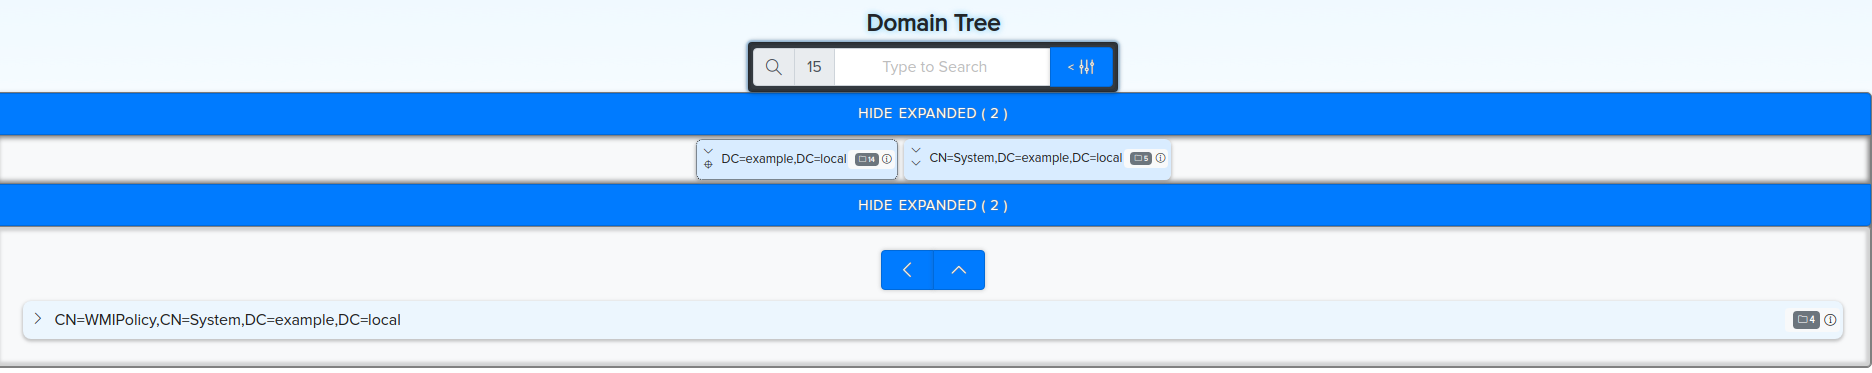 show_domain_tree_containers_nested_level1.png